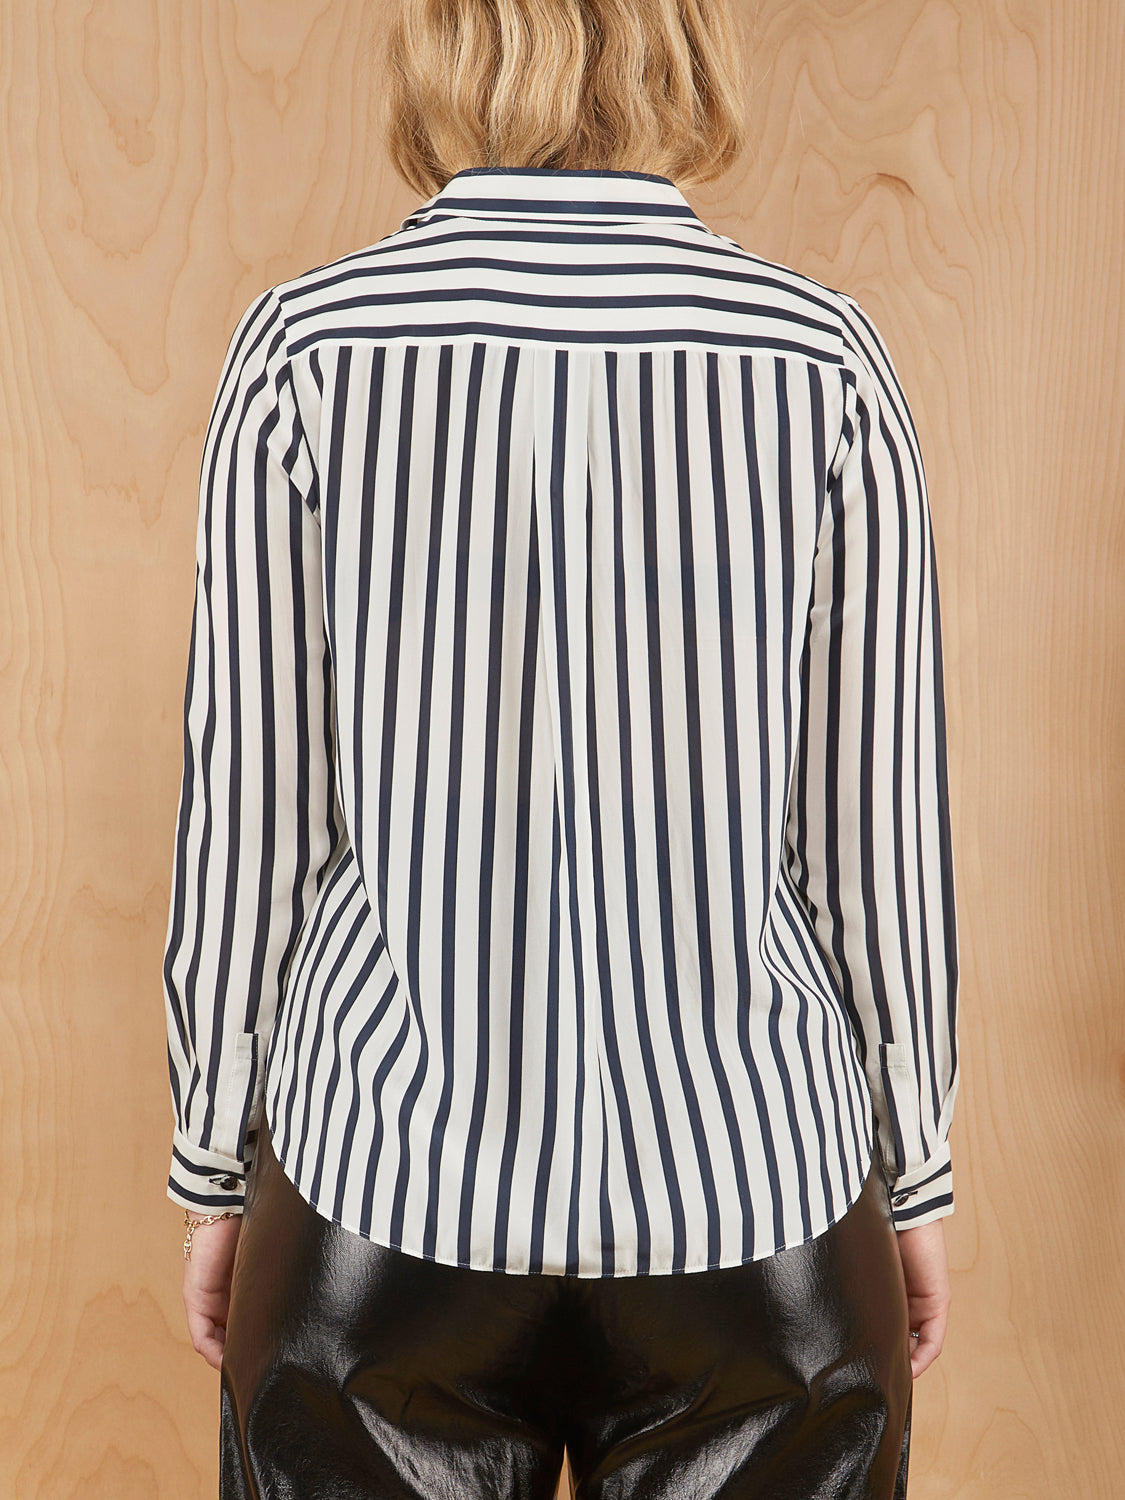 Tomorrowland Striped Button Up